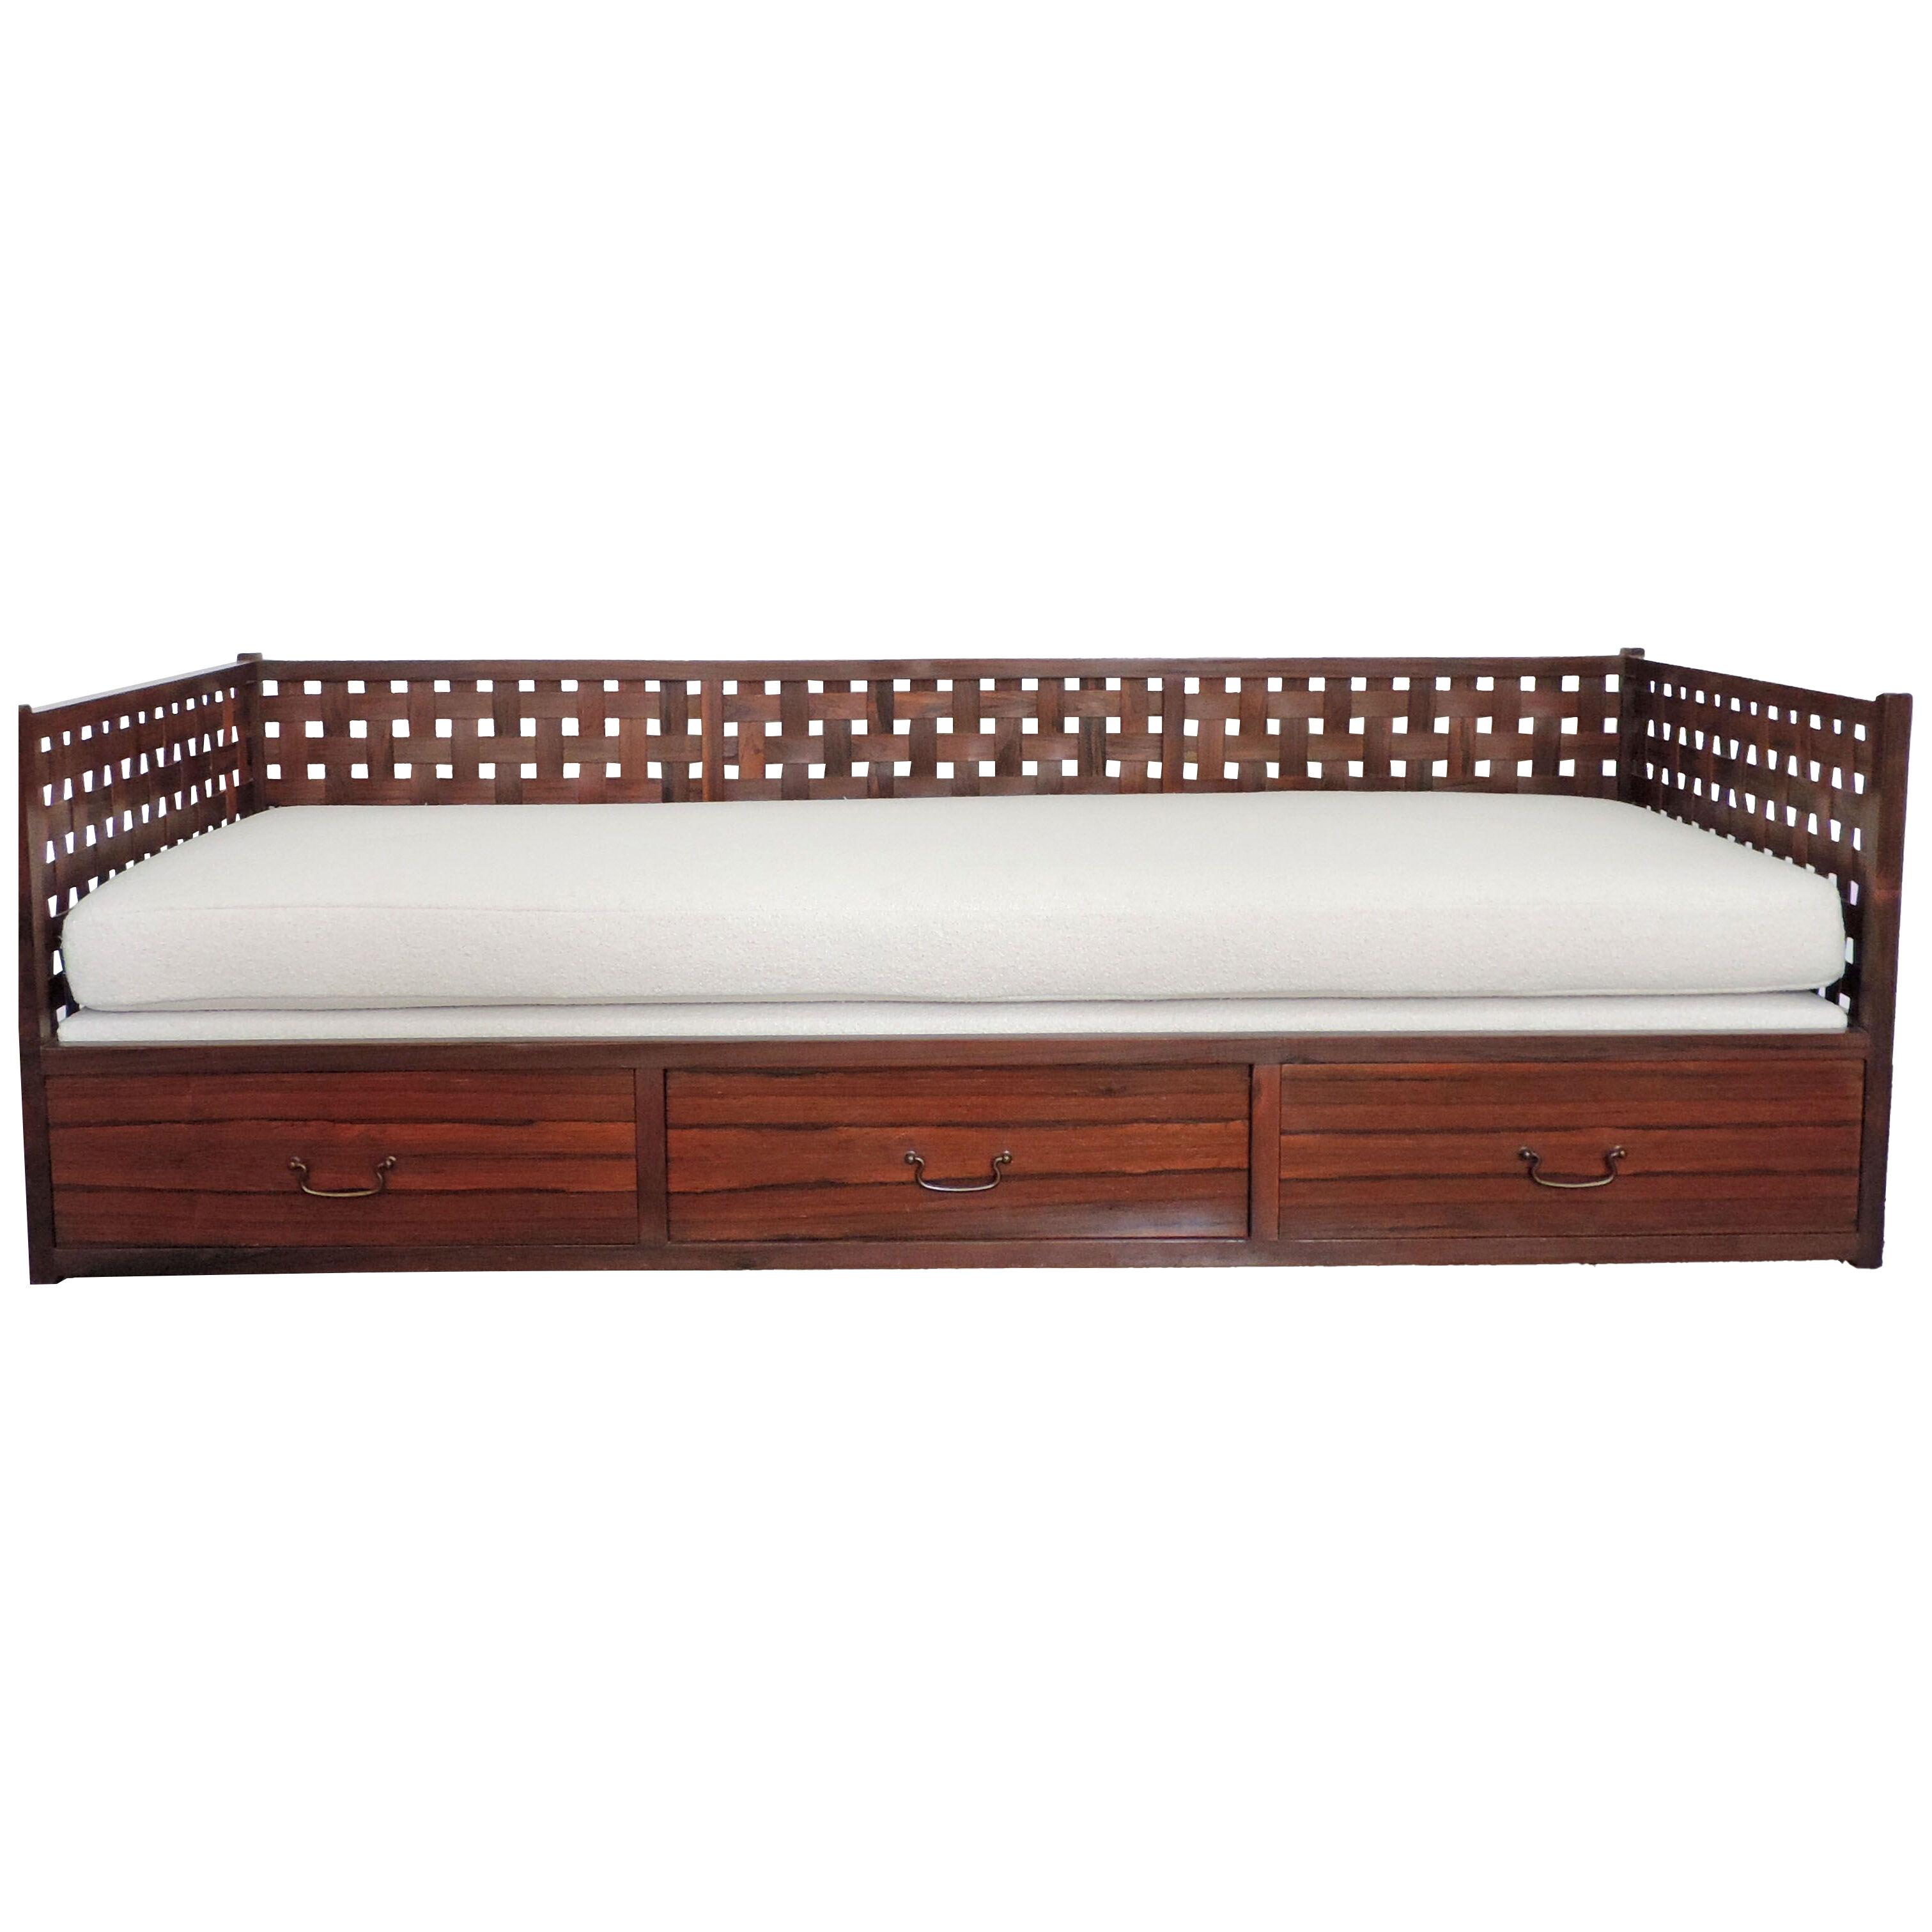 Tito Agnoli Daybed with Three drawers for Mobilia, Italy, 1960s